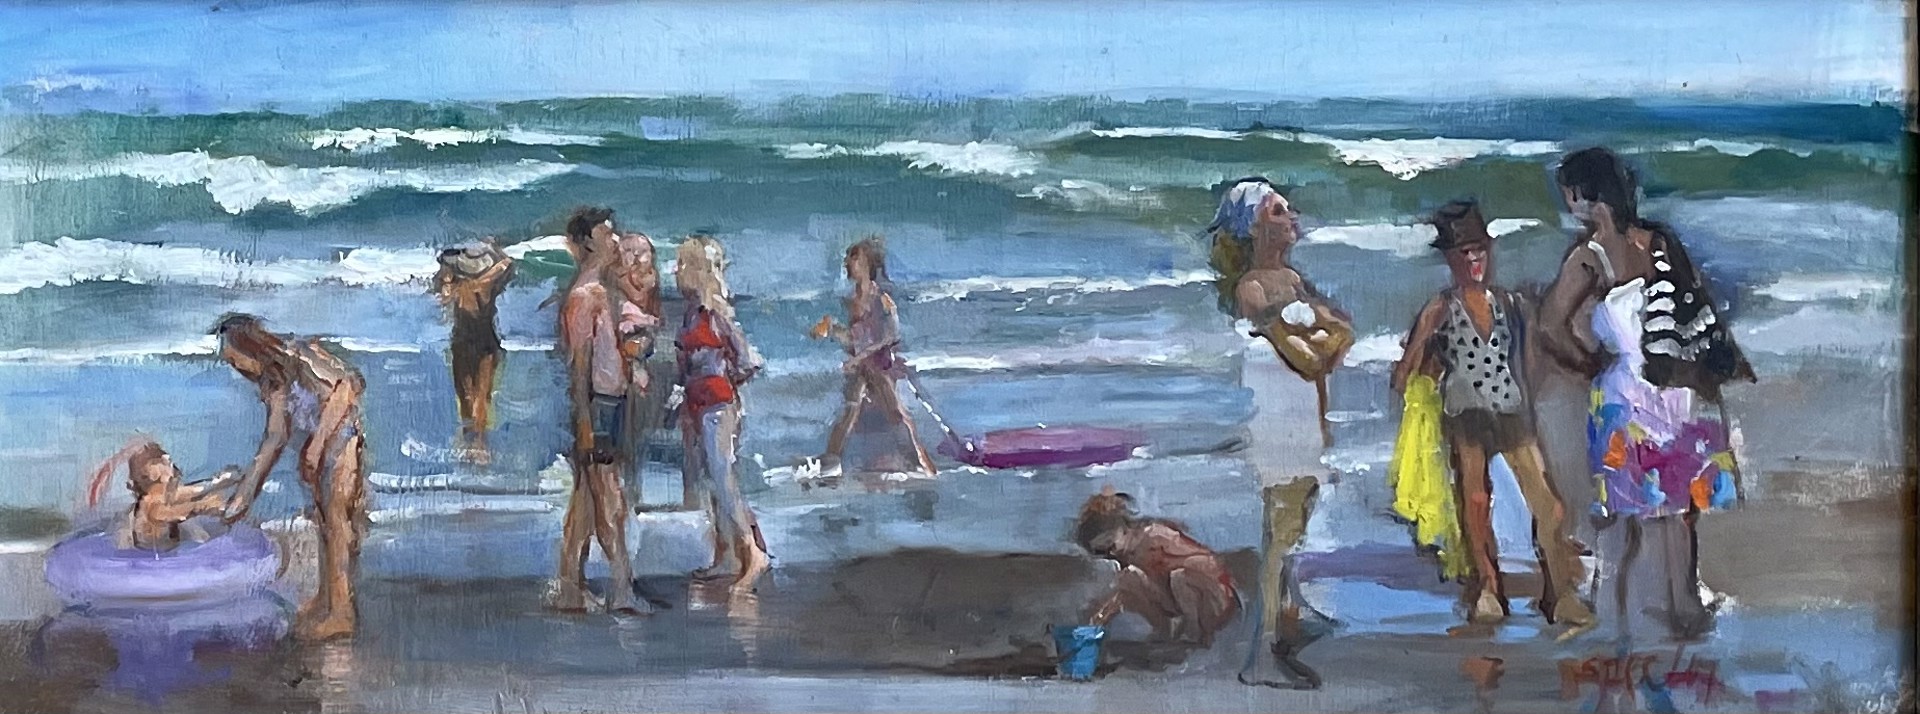 At the Beach by Dori Spector